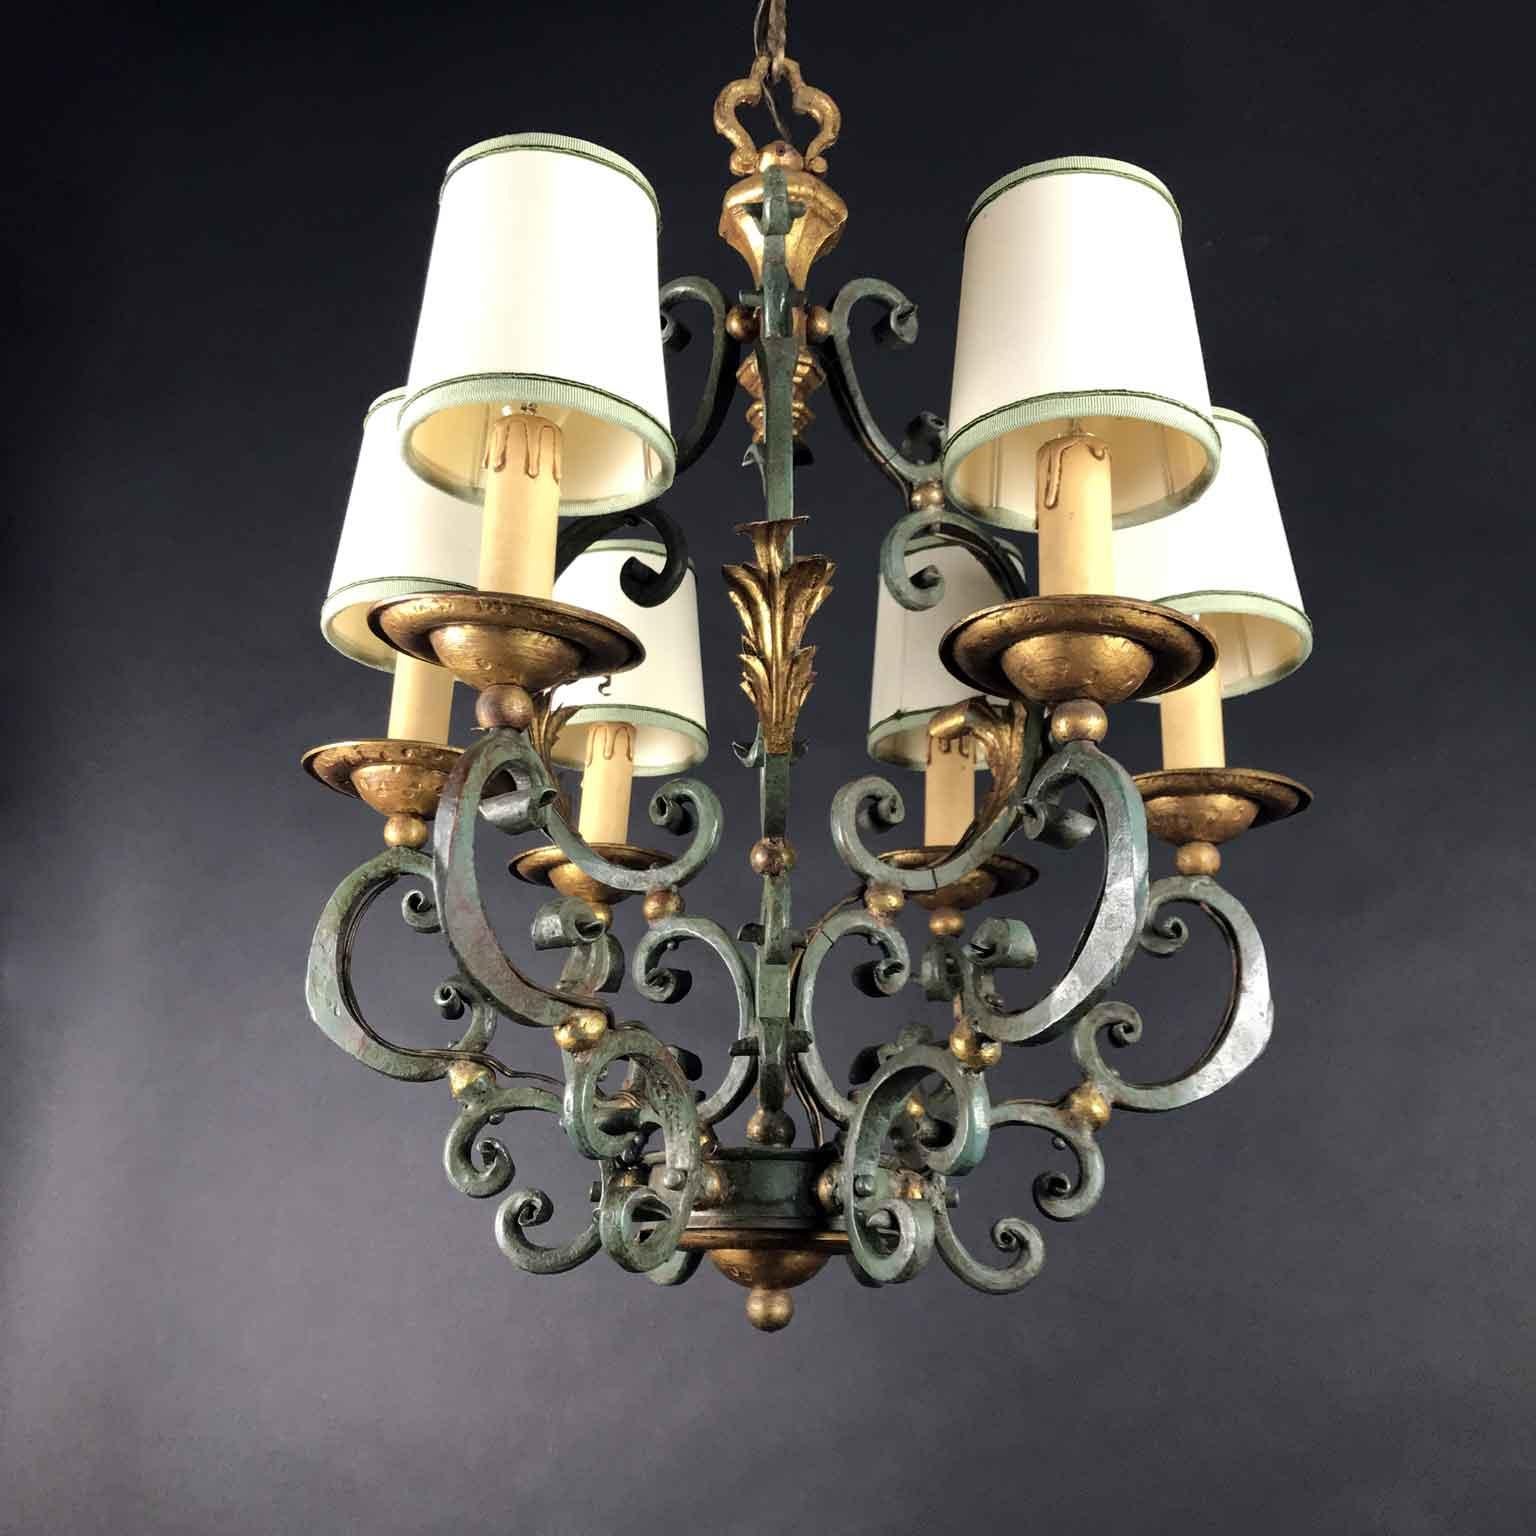 Elegant 20th century Italian dusty gray painted and partially gilt-leaf chandelier, bird cage wrought iron scrolling structure, forged with foliate motifs, with six arms ending with E14 light bulbs.
White lampshade for display only - not included